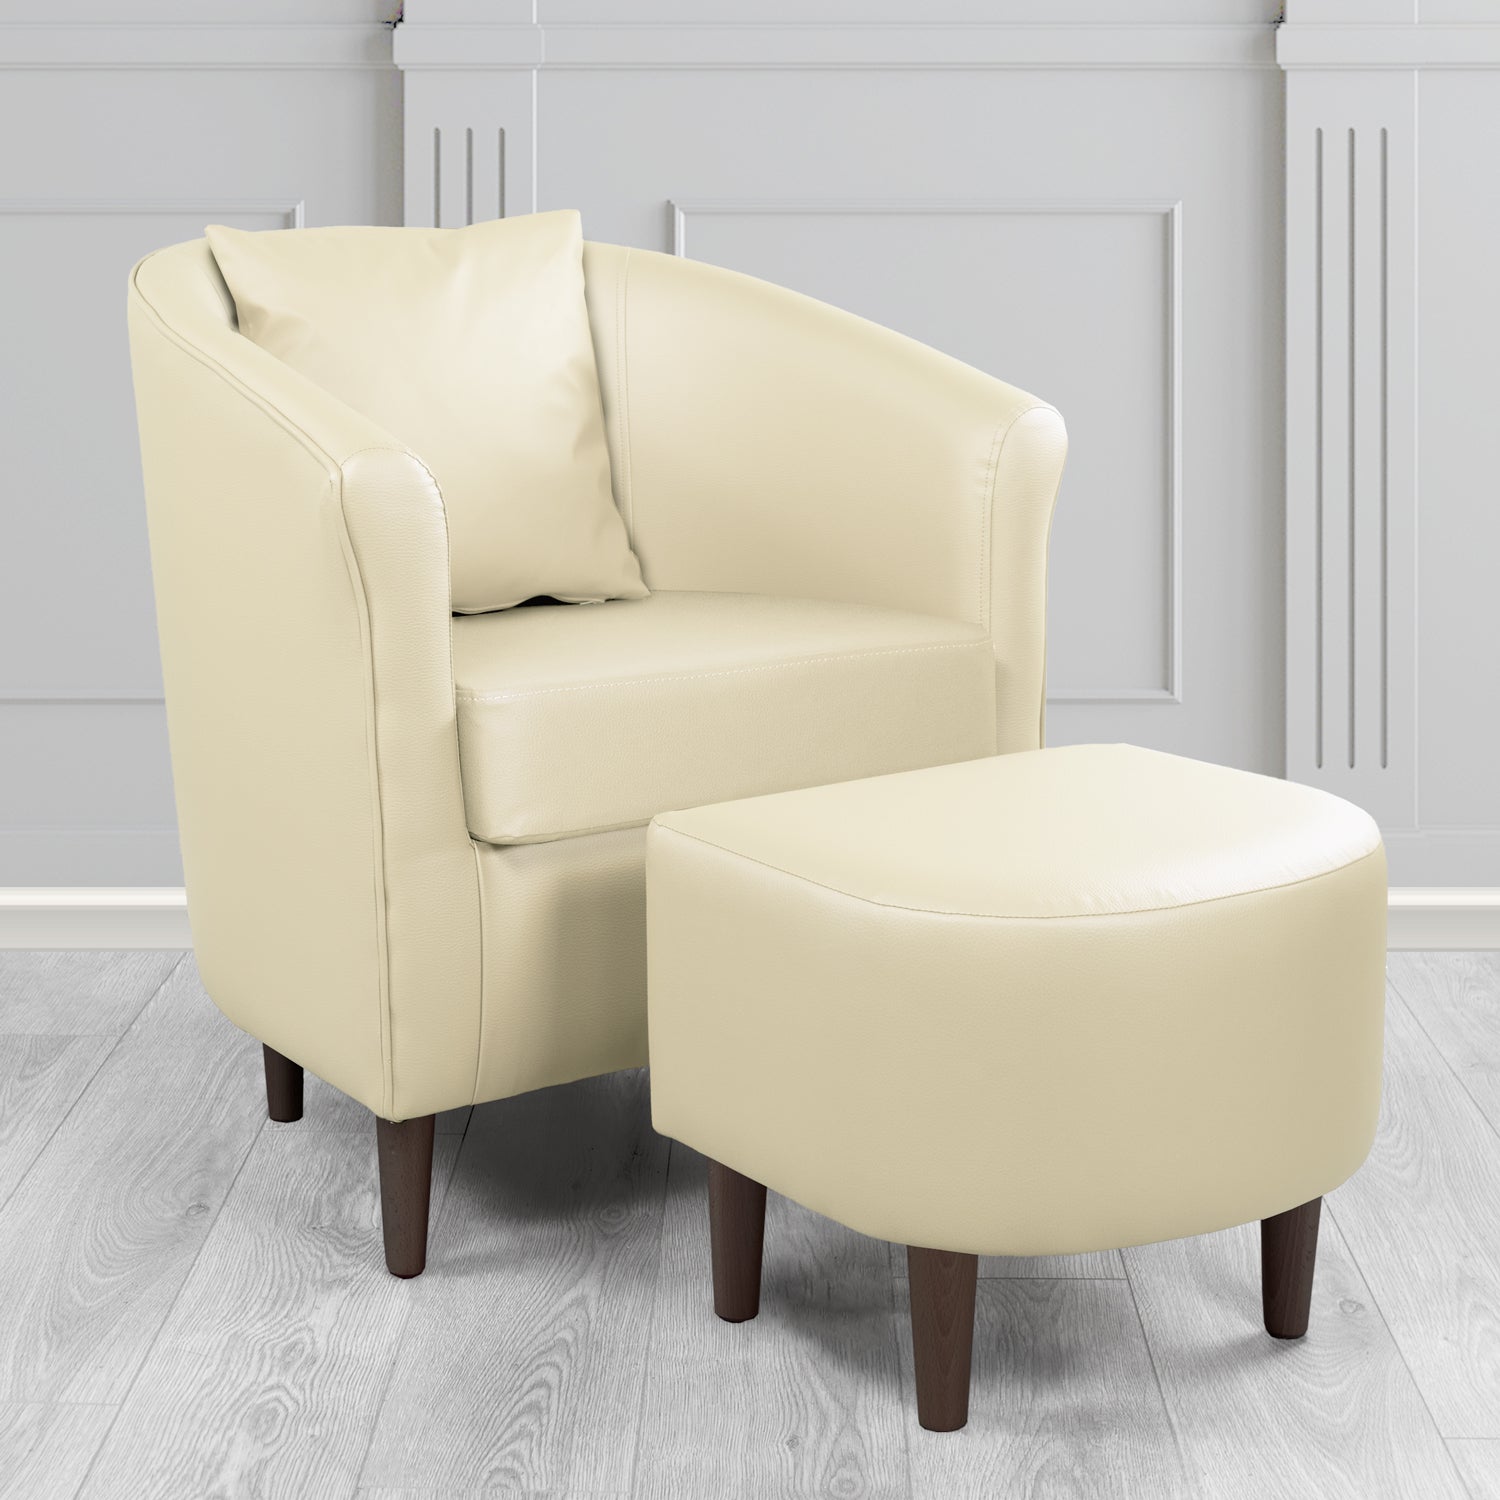 St Tropez Tub Chair with Footstool Set in Madrid Cream Faux Leather - The Tub Chair Shop